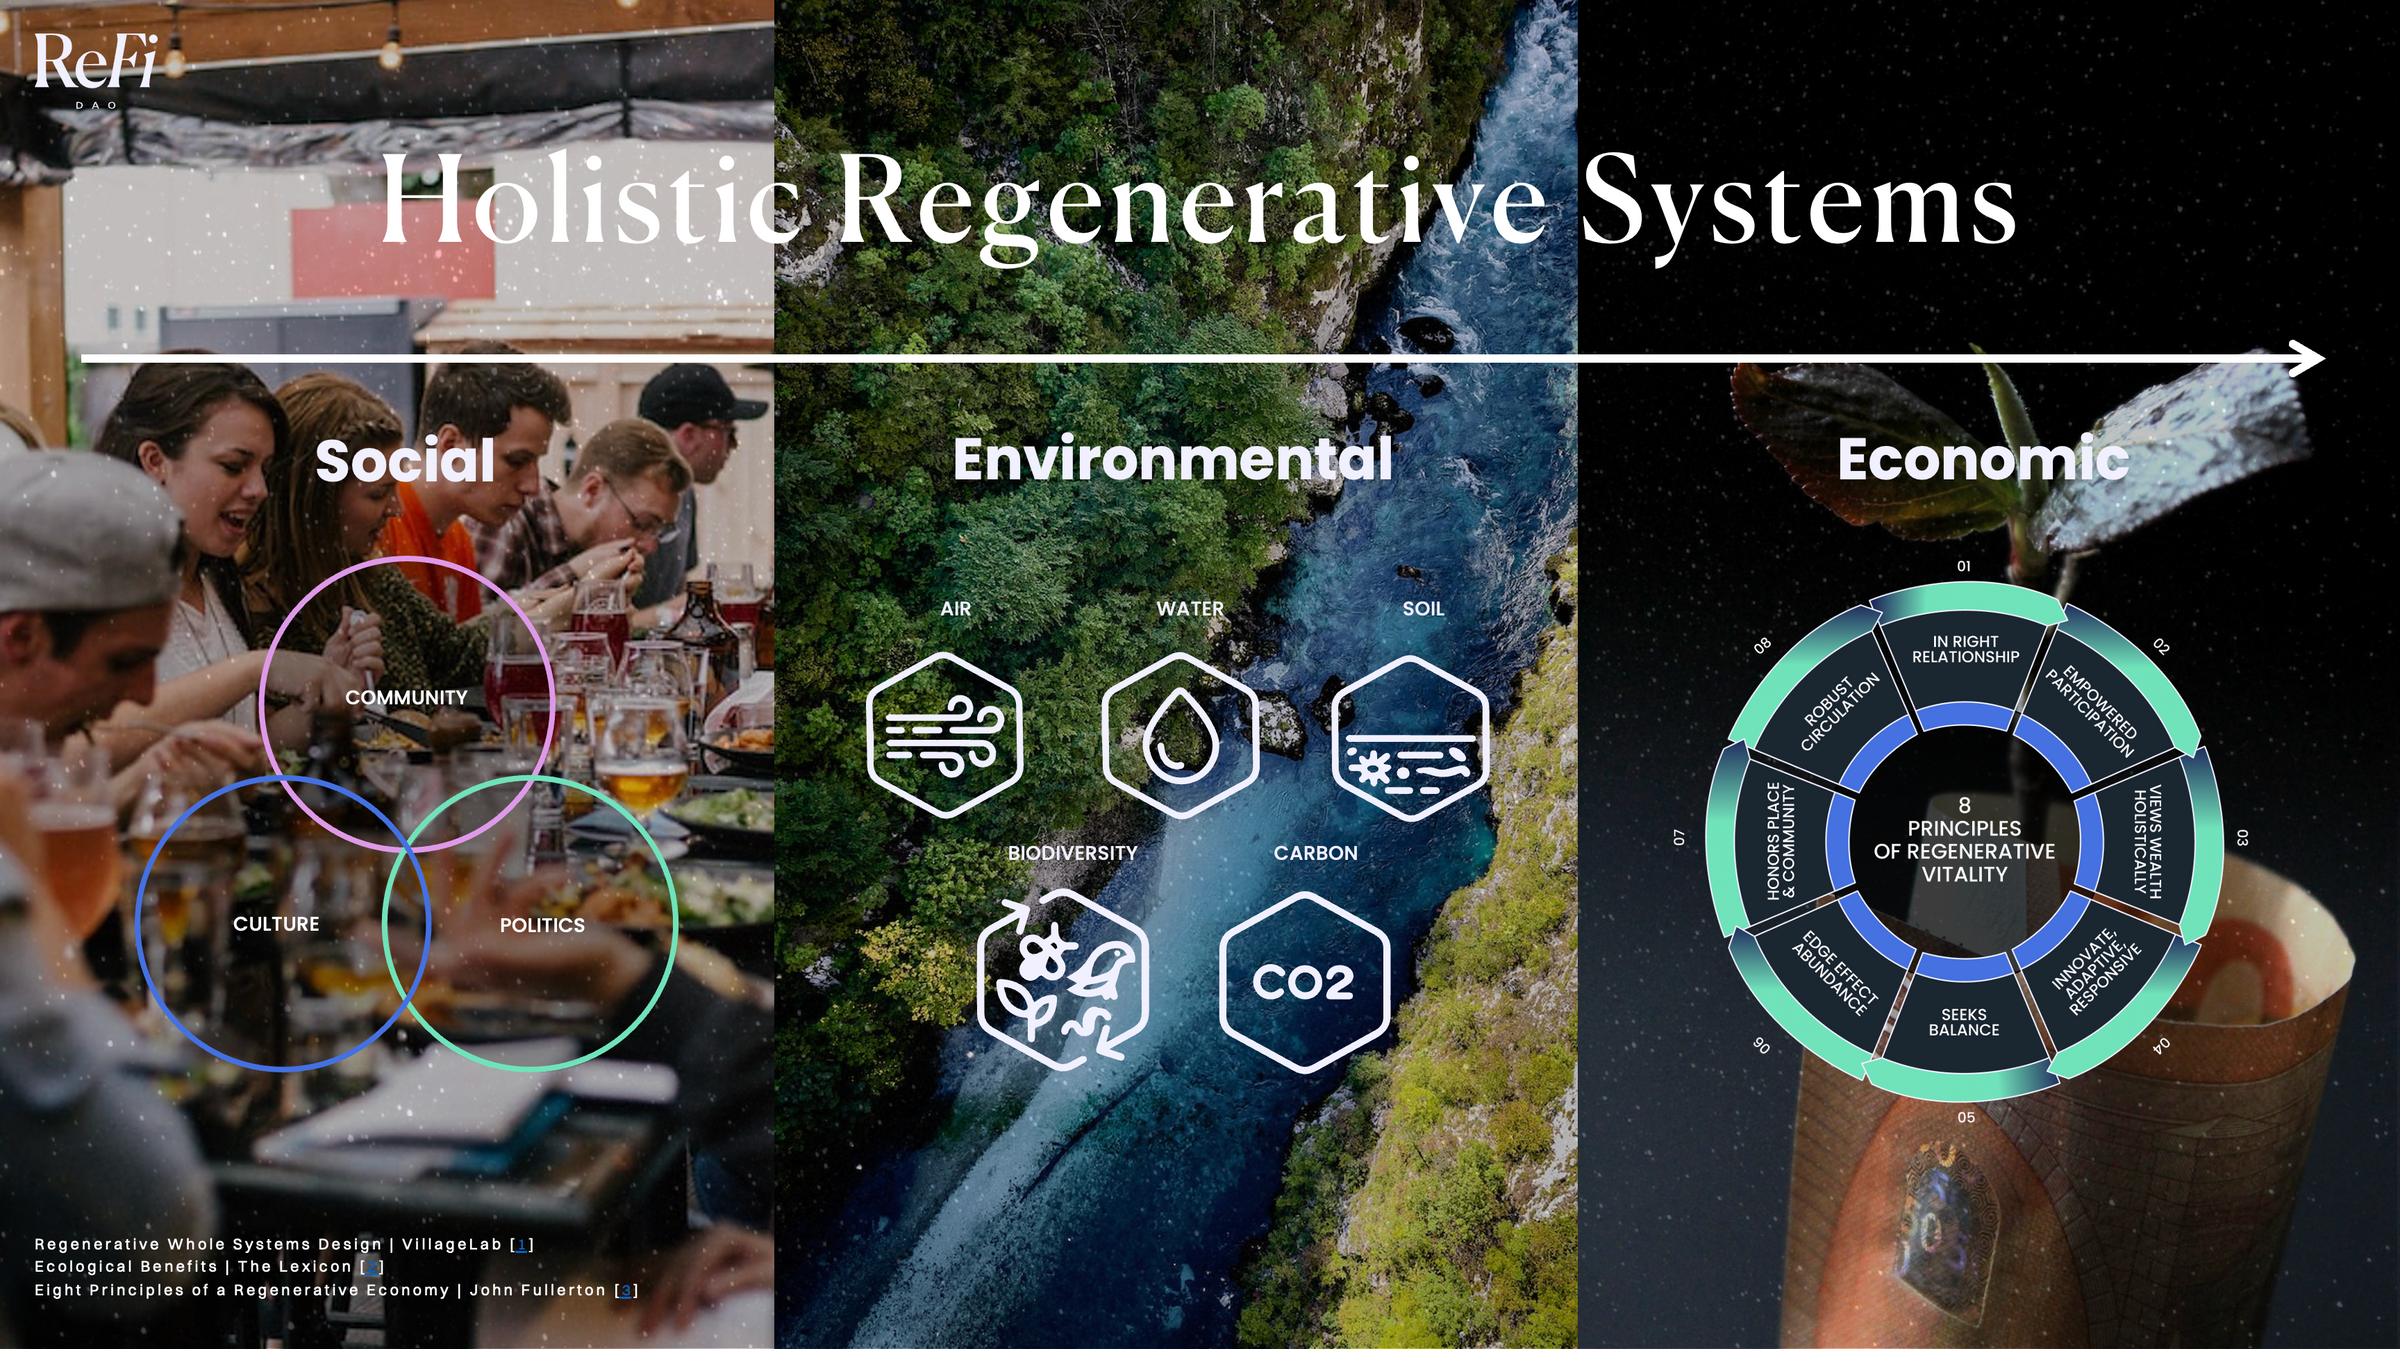 Shout out to Regenerative Whole Systems Design By VillageLab, Ecological Benefits Framework from The Lexicon, and the Eight principles of Regenerative Economics by John Fullerton